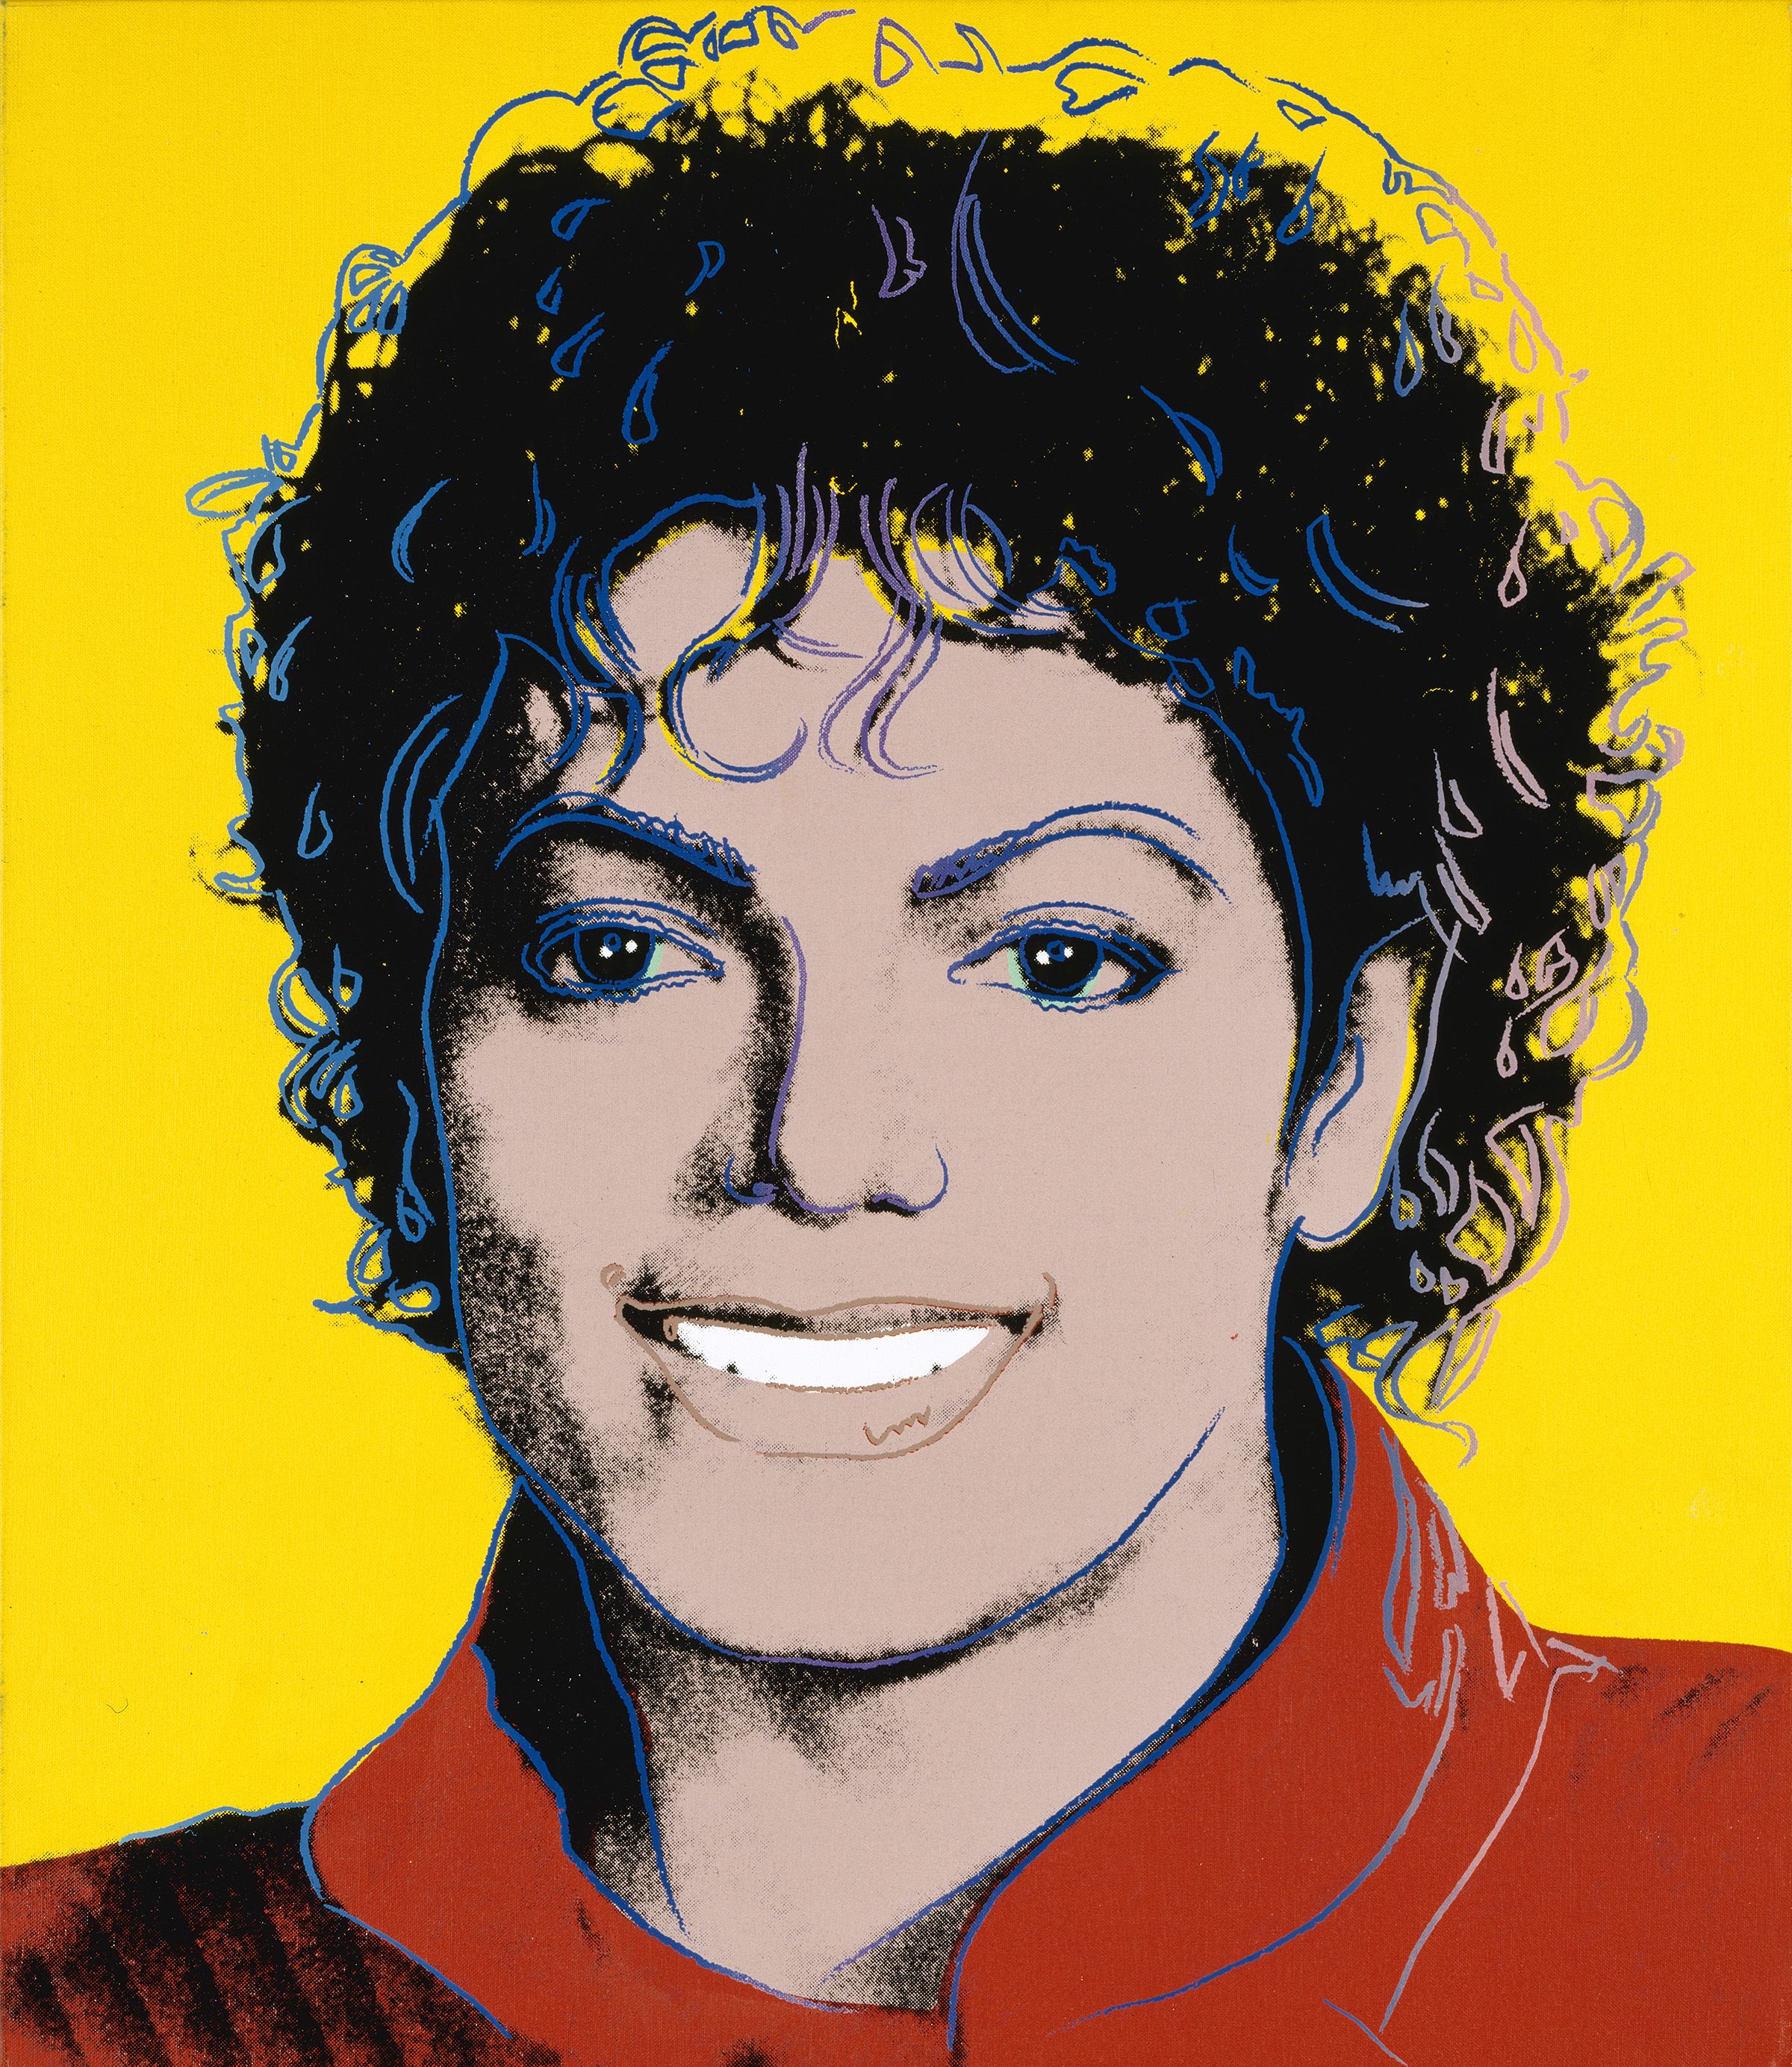 Michael Jackson by Andy Warhol 1984. National Portrait Gallery, Smithsonian Institution, Washington D.C. / Gift of Time magazine © 2018 The Andy Warhol Foundation for the Visual Arts, Inc. / Licensed by DACS, London